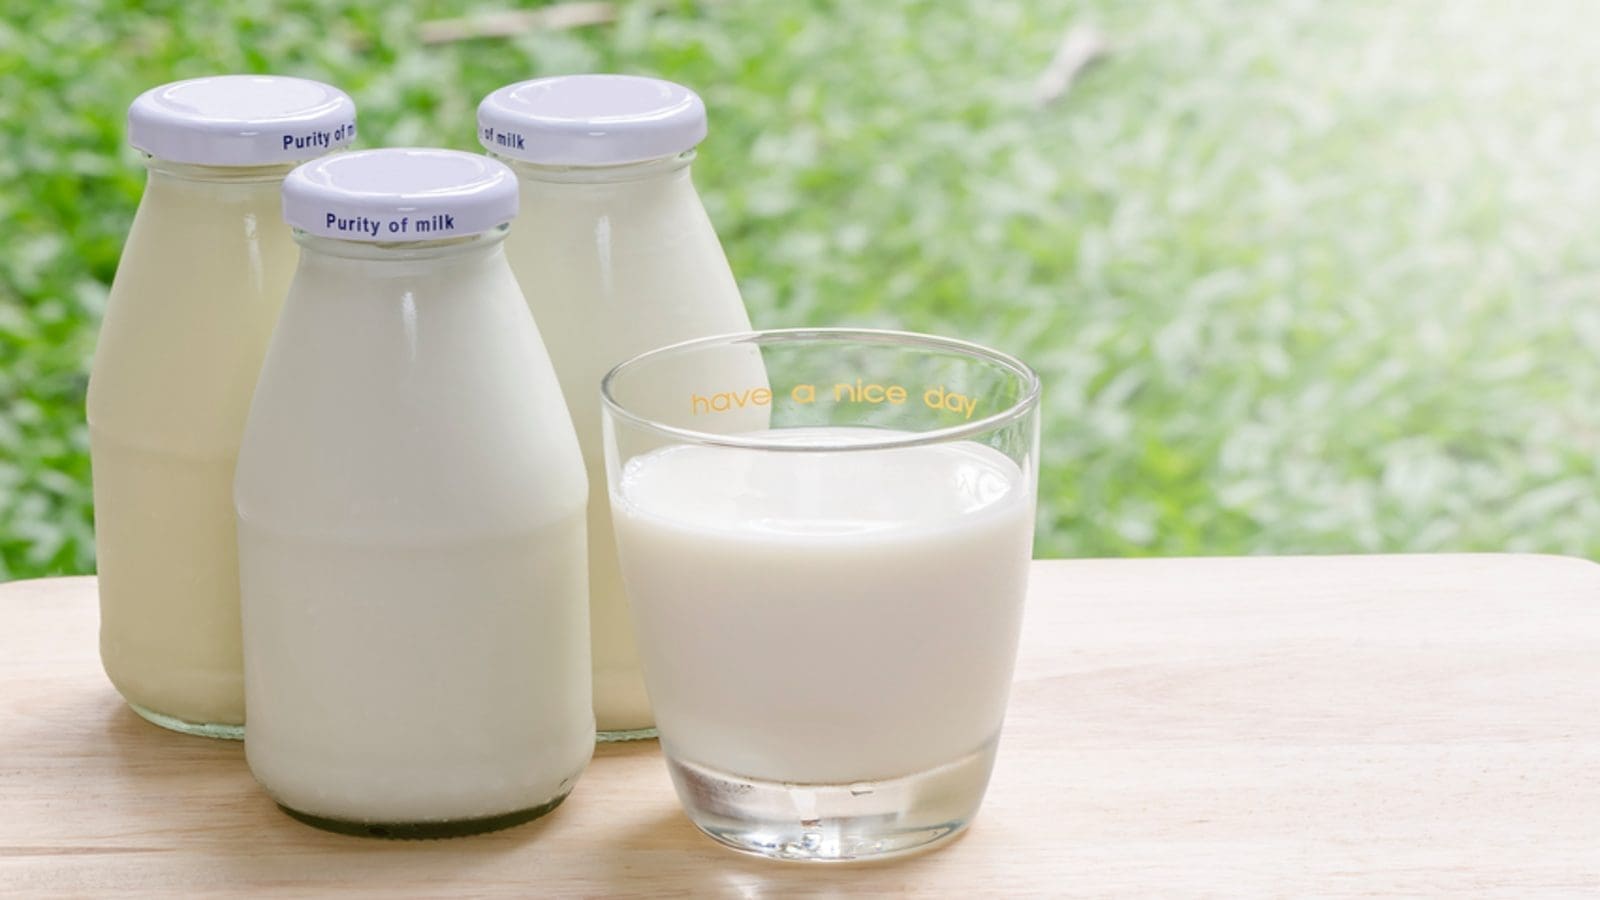 Naturo’s milk processing technology offers higher digestibility of milk to dairy-sensitive consumers